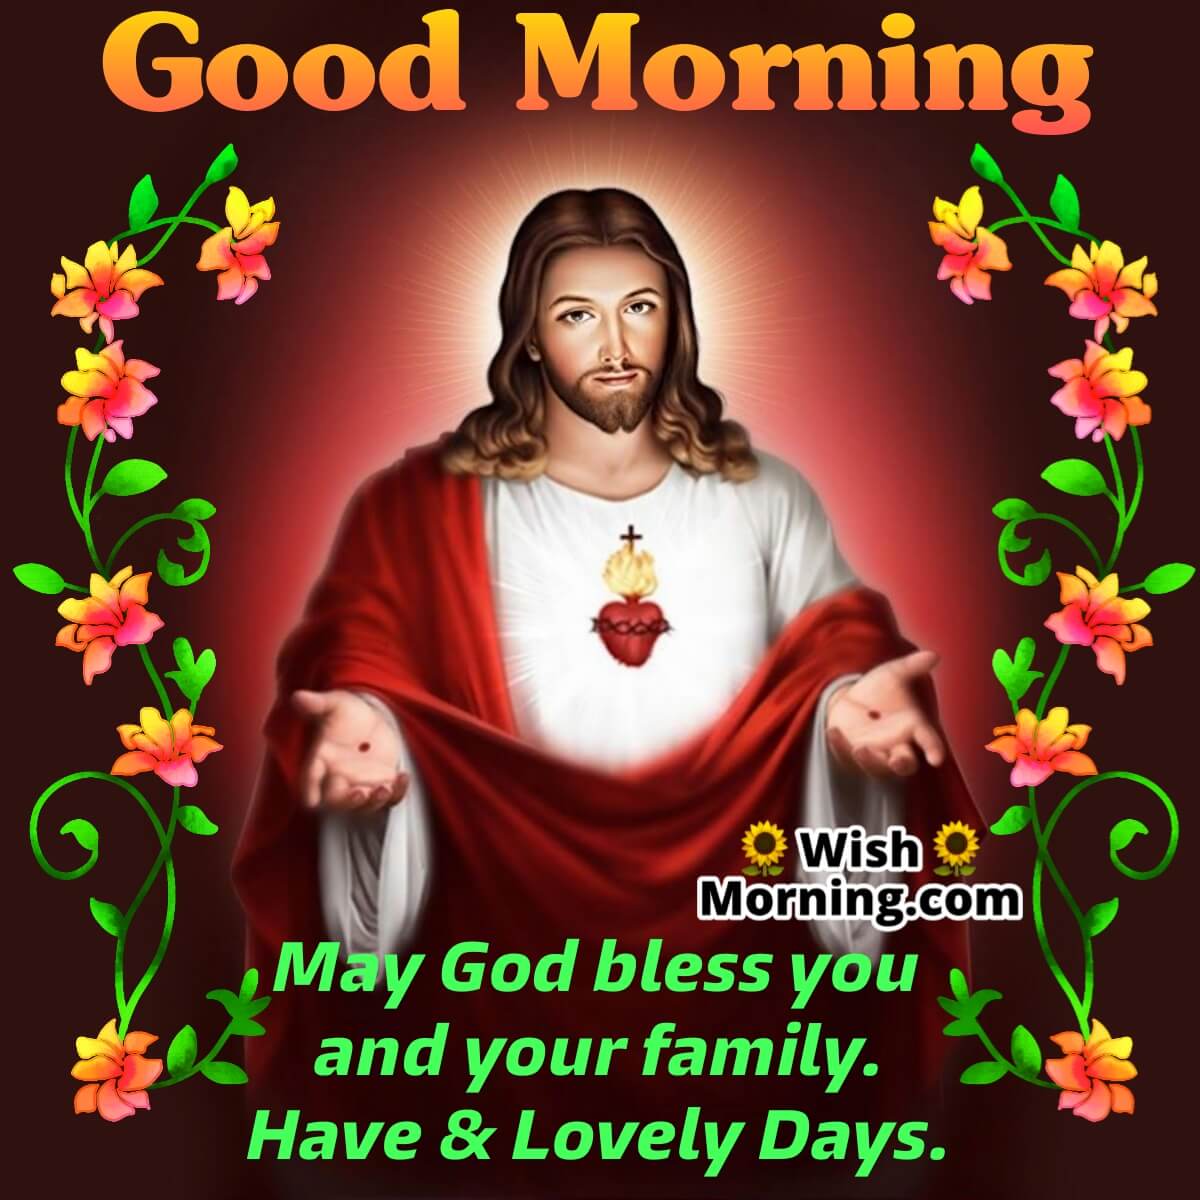 Good Morning Jesus Bless You And Your Family